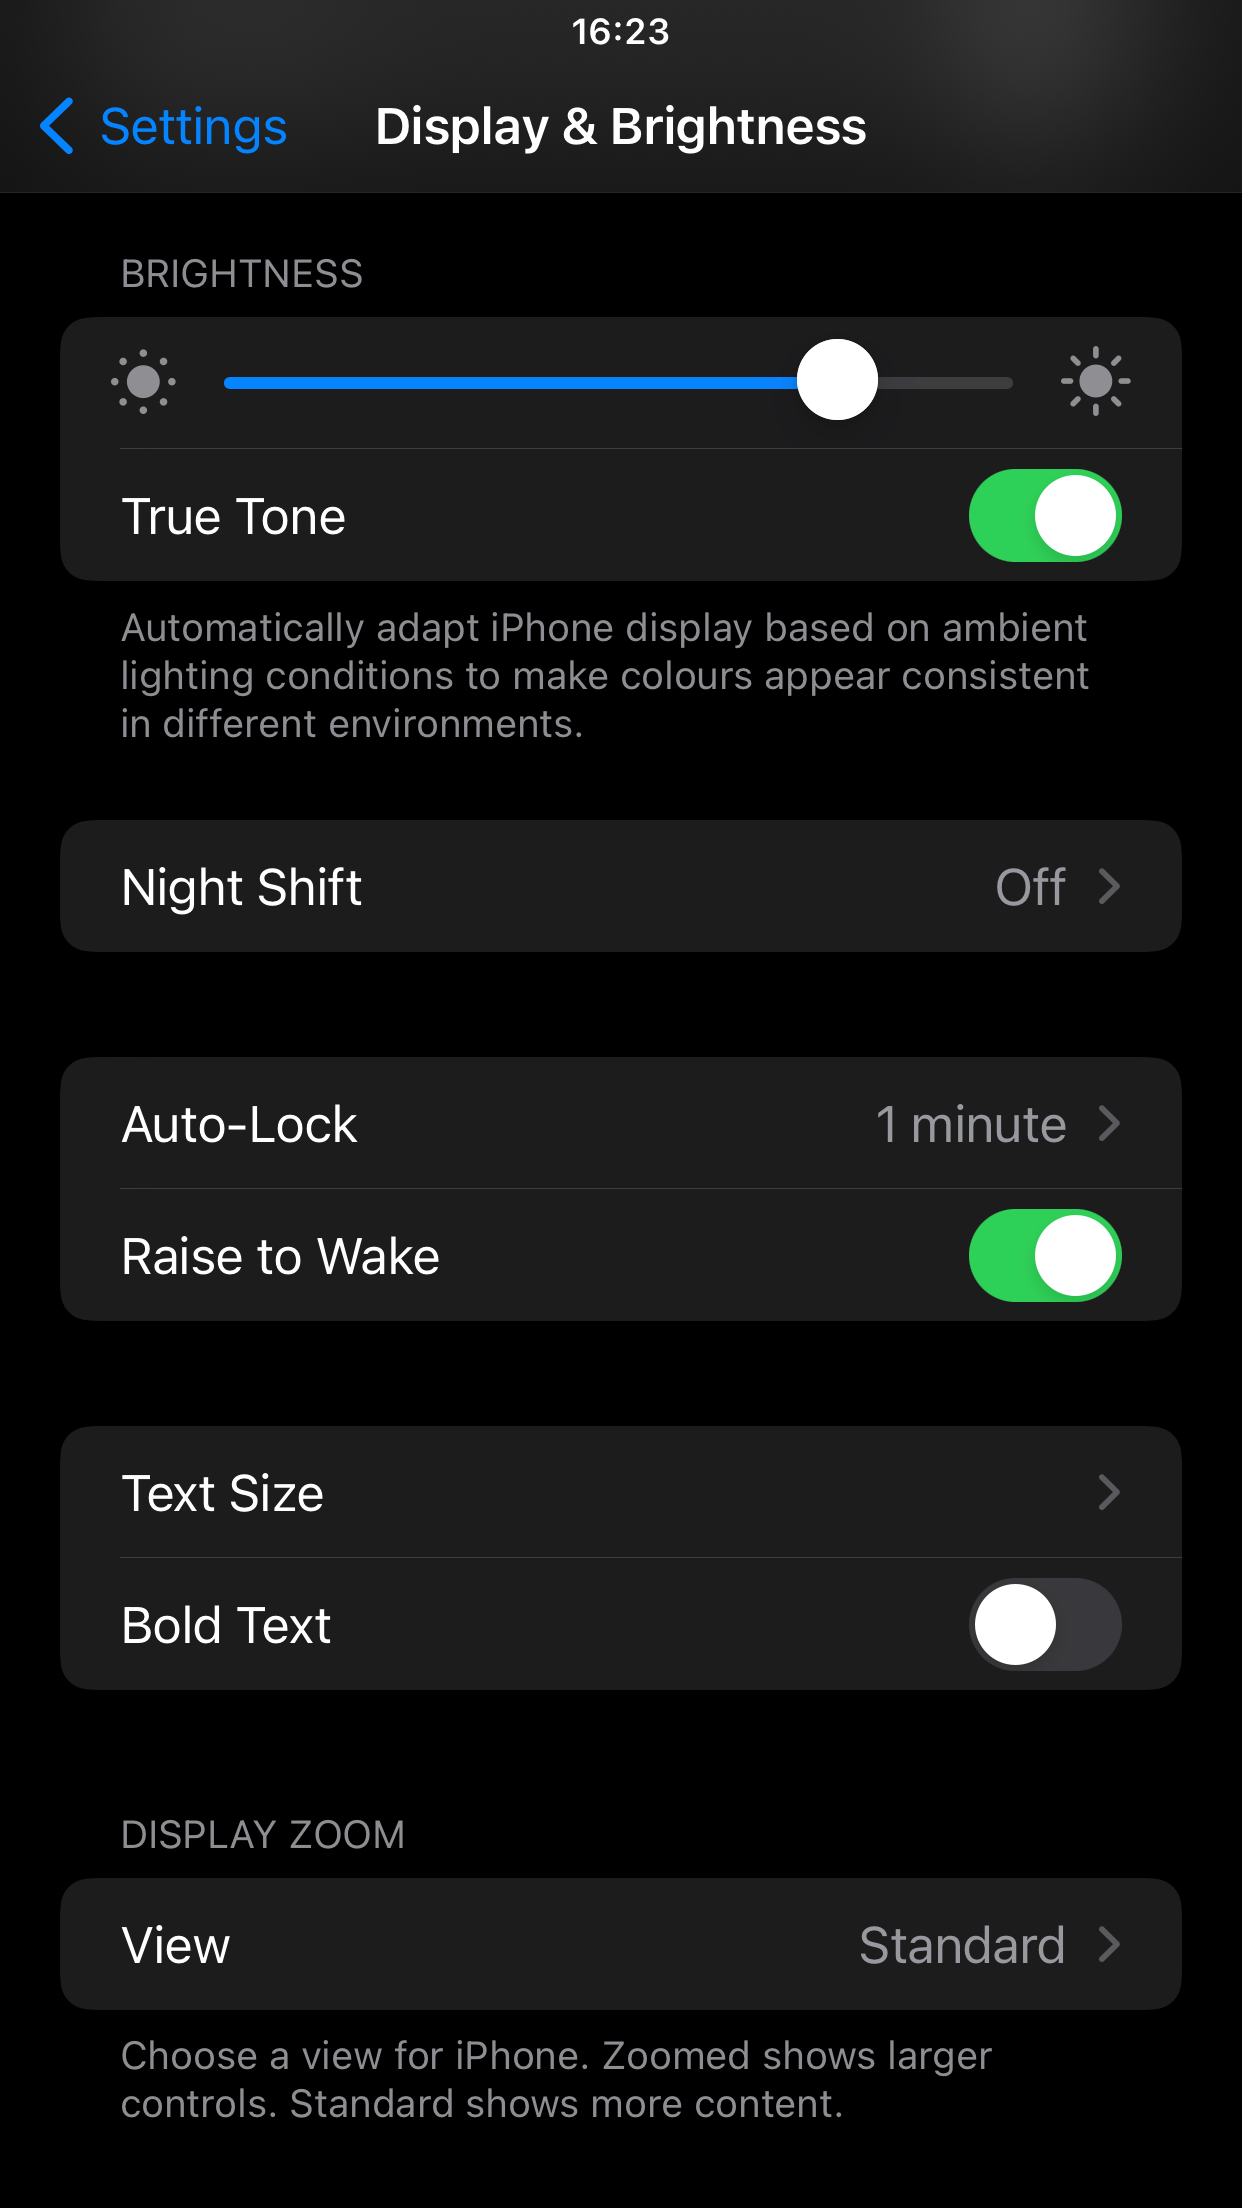 Raise to Wake is on in iPhone settings